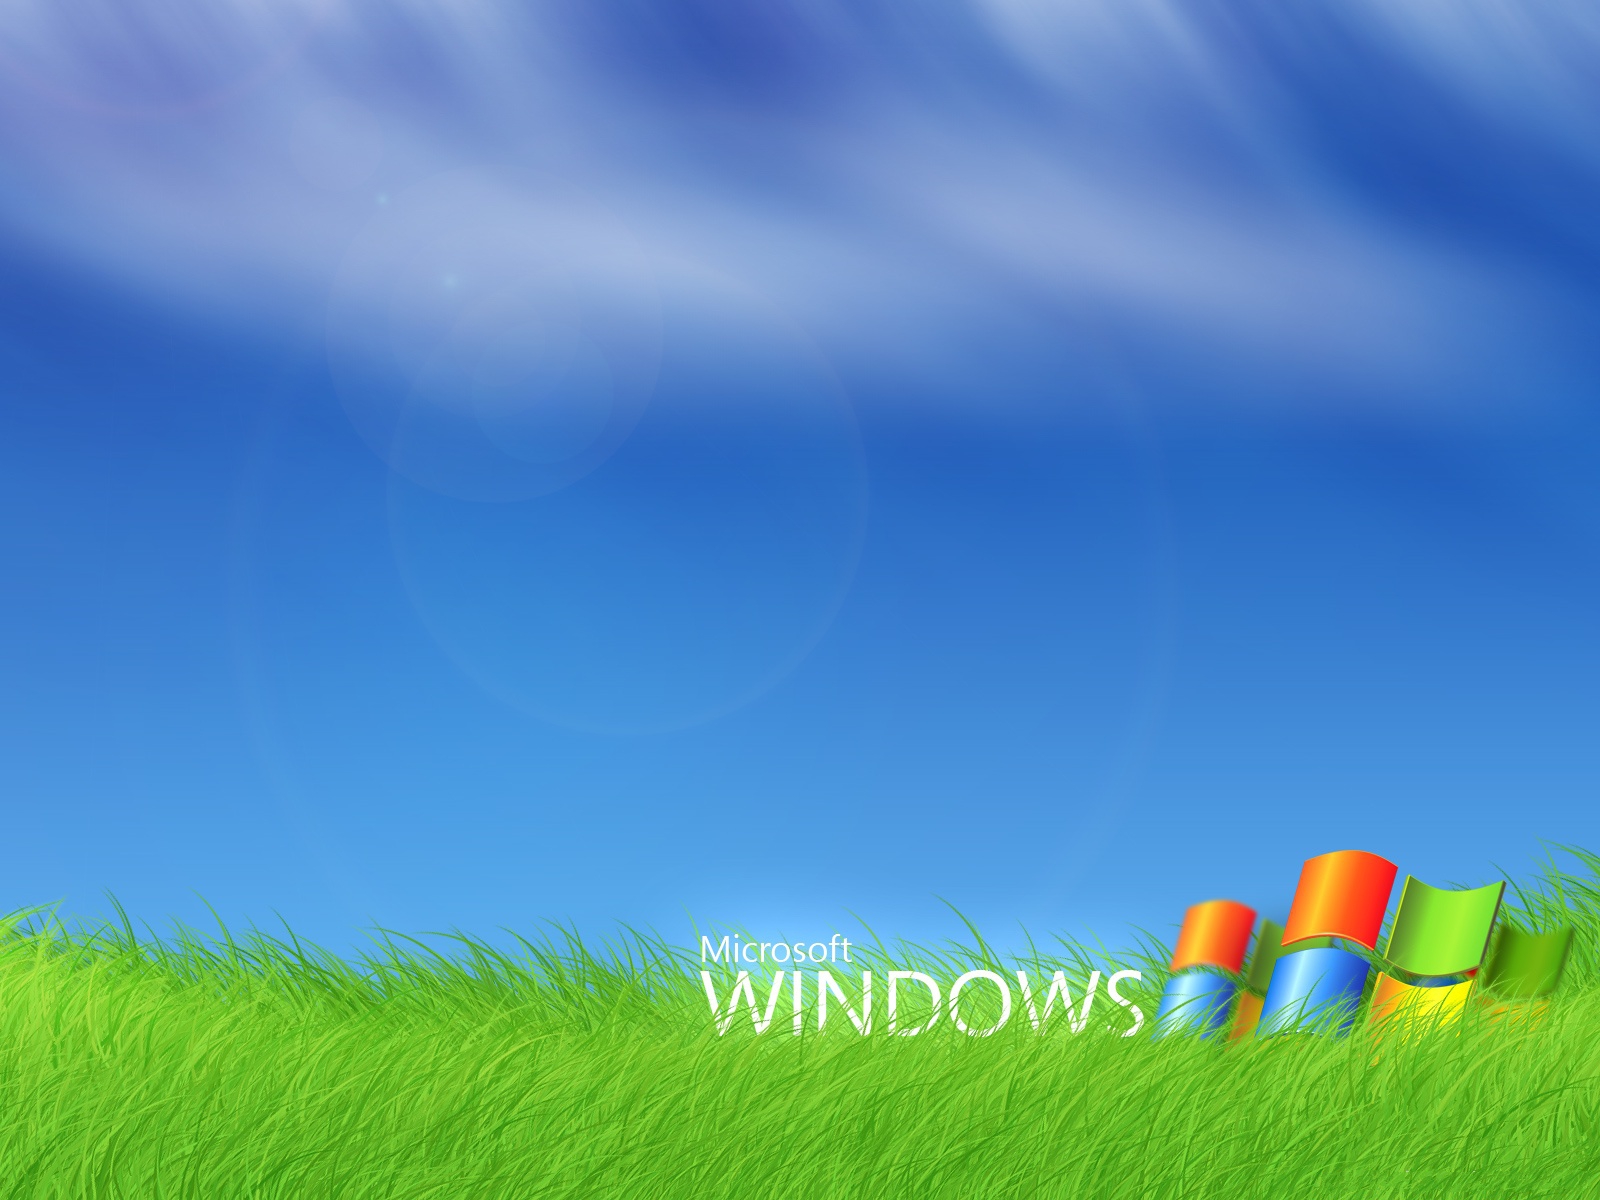 HD Wallpapers for Windows 7 